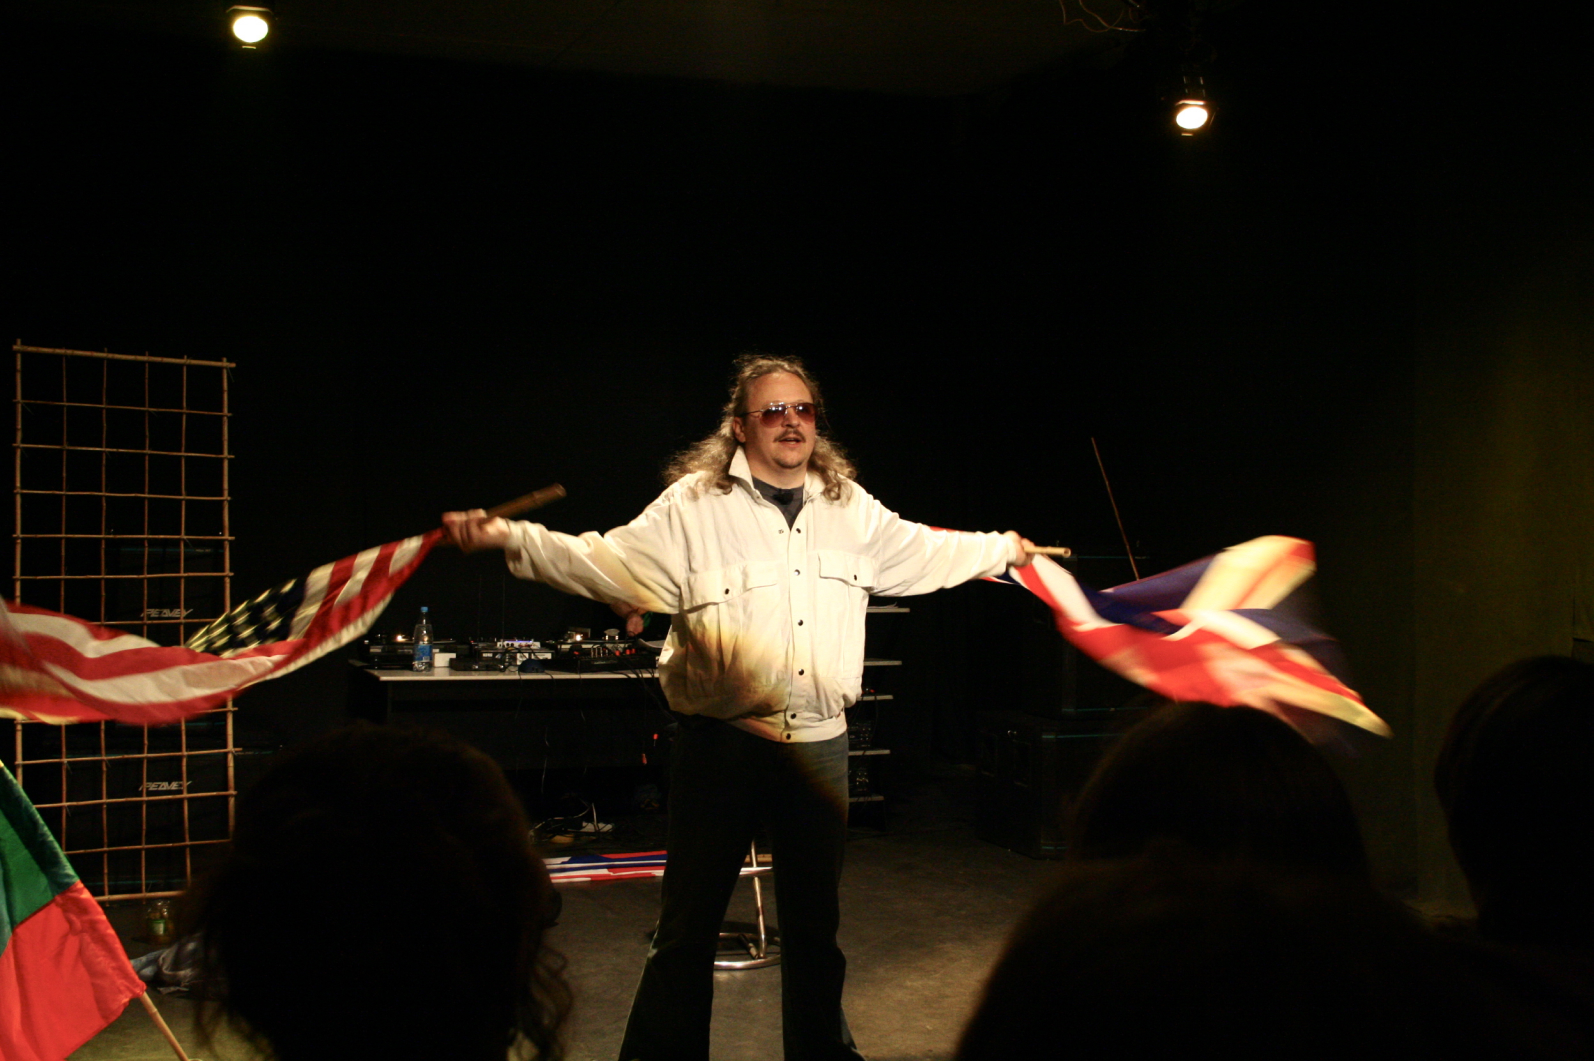 Performer on stage with sunglasses on and swaying flags of Britain and USA.